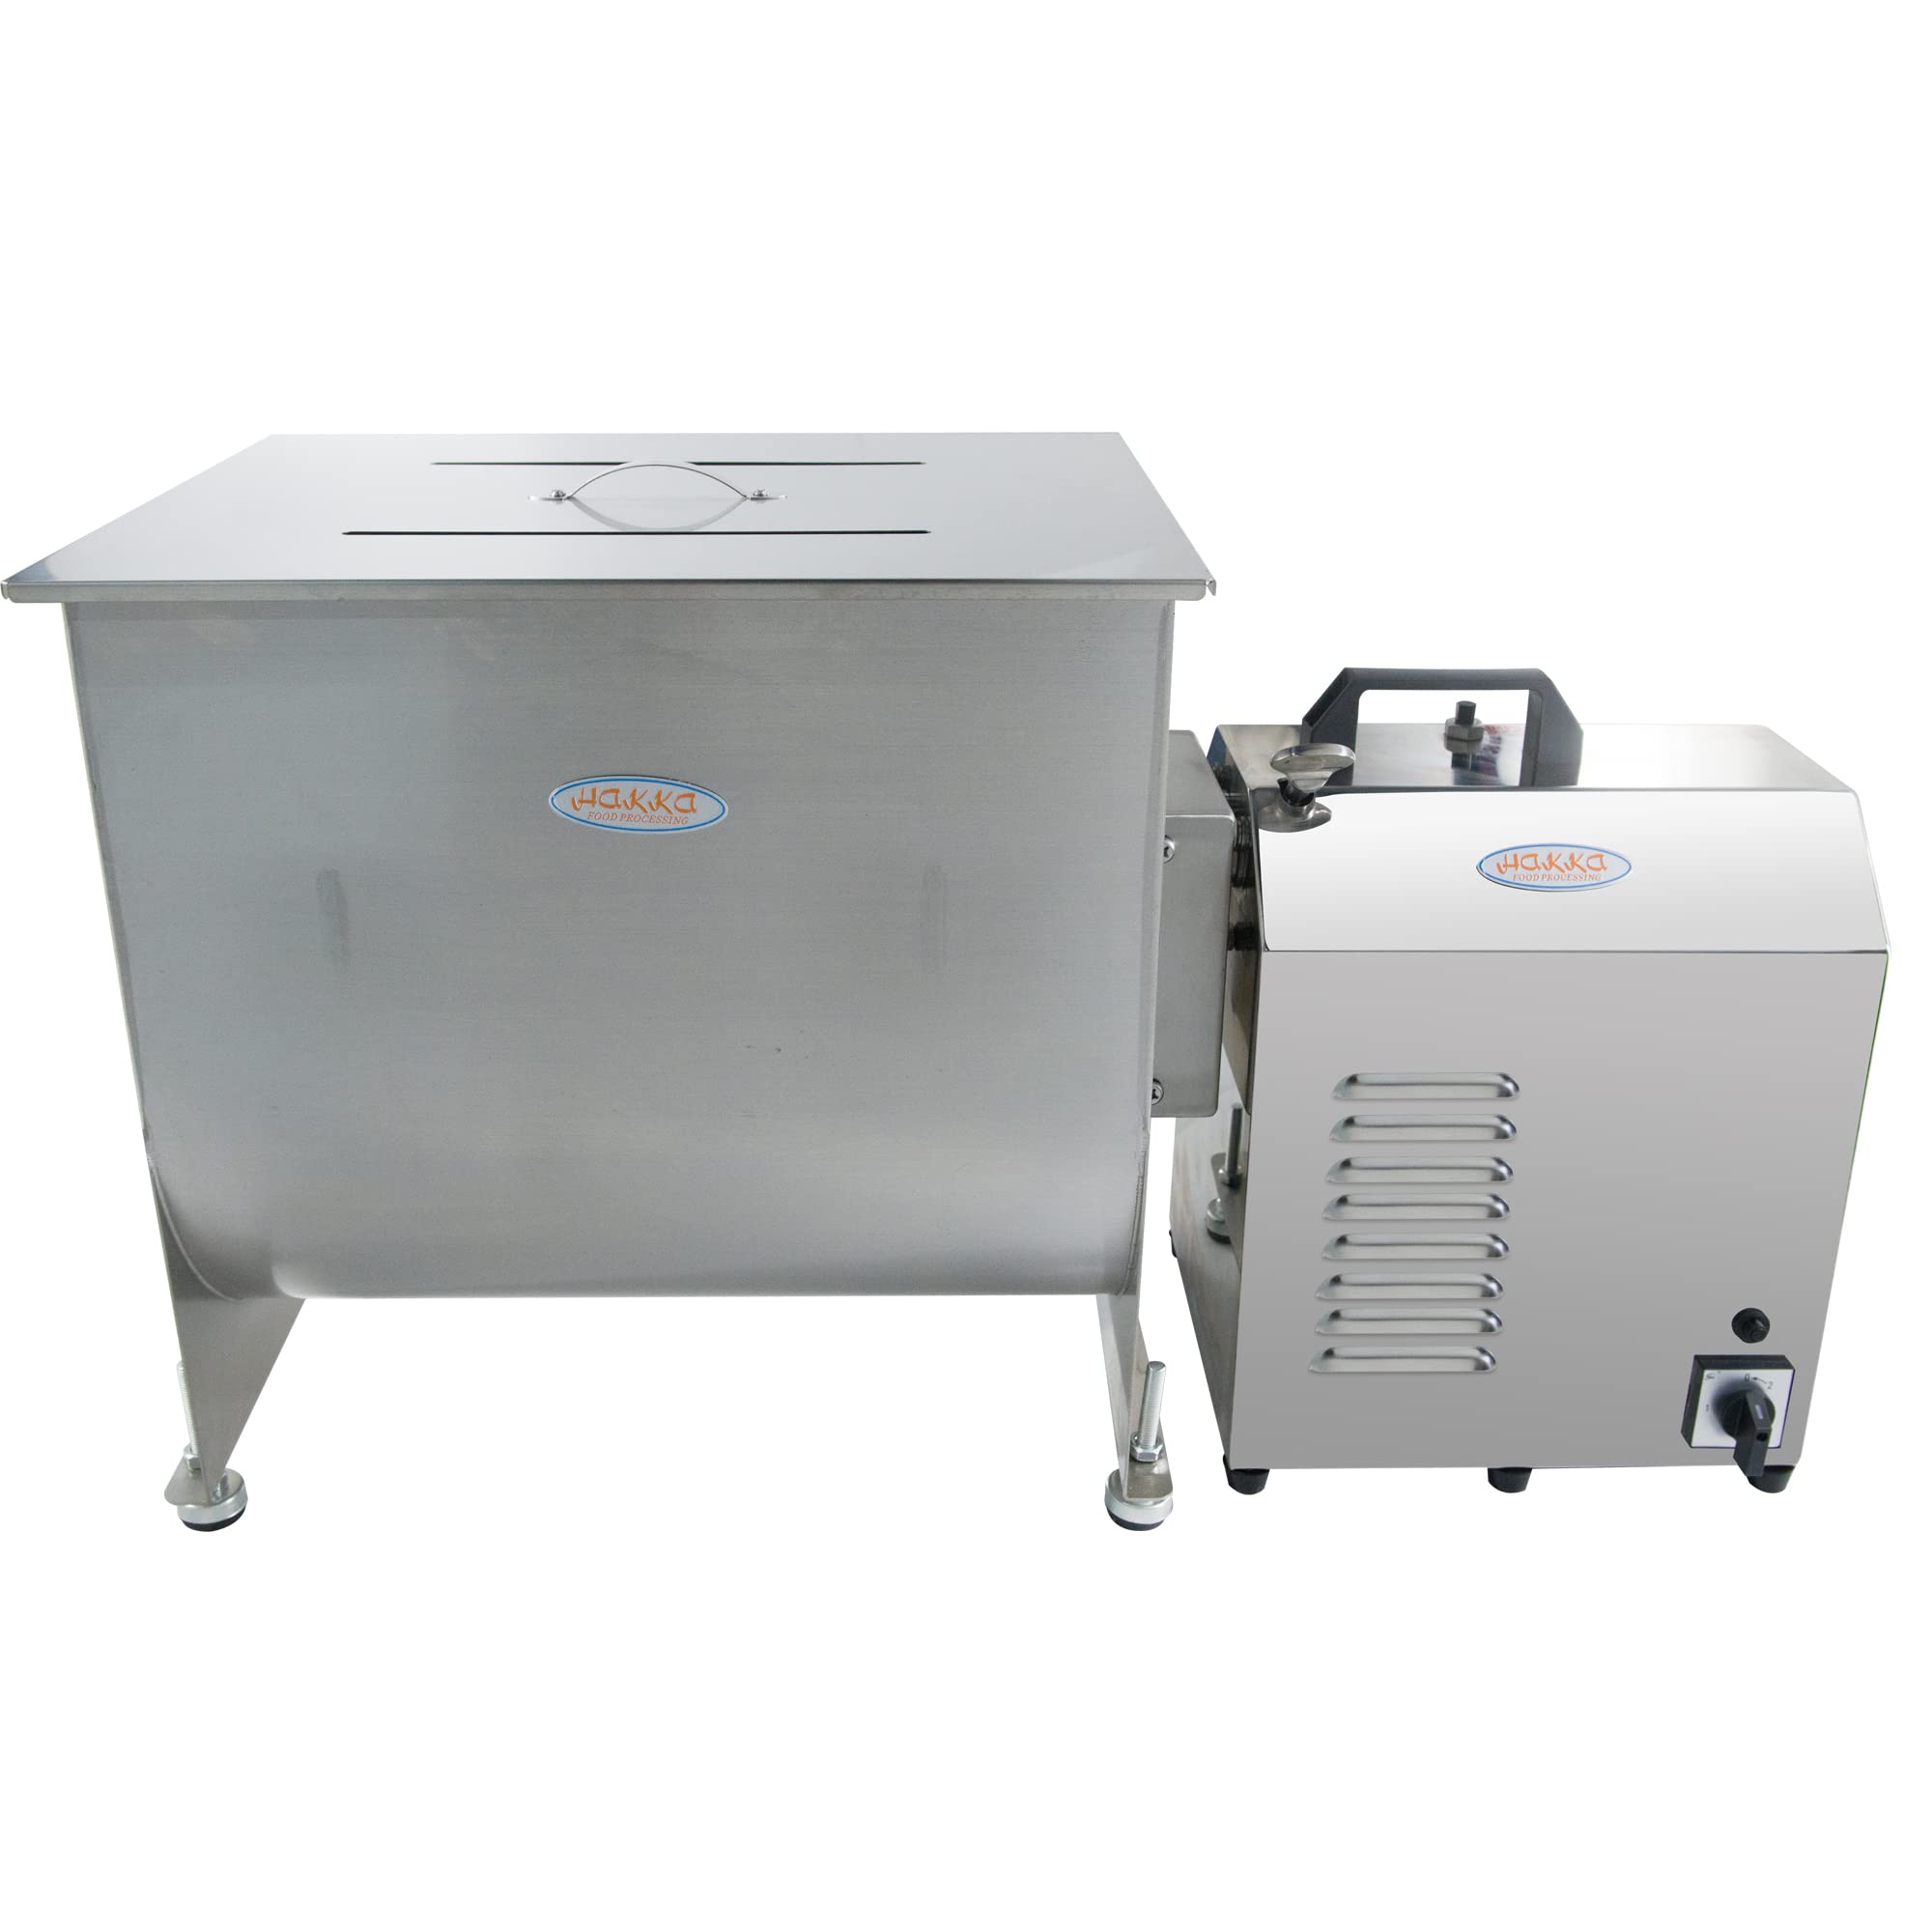 Hakka 60-Pound/30-Liter capacity Tank Stainless Steel Electric Meat Mixer (Mixing Maximum 45-Pound for Meat)